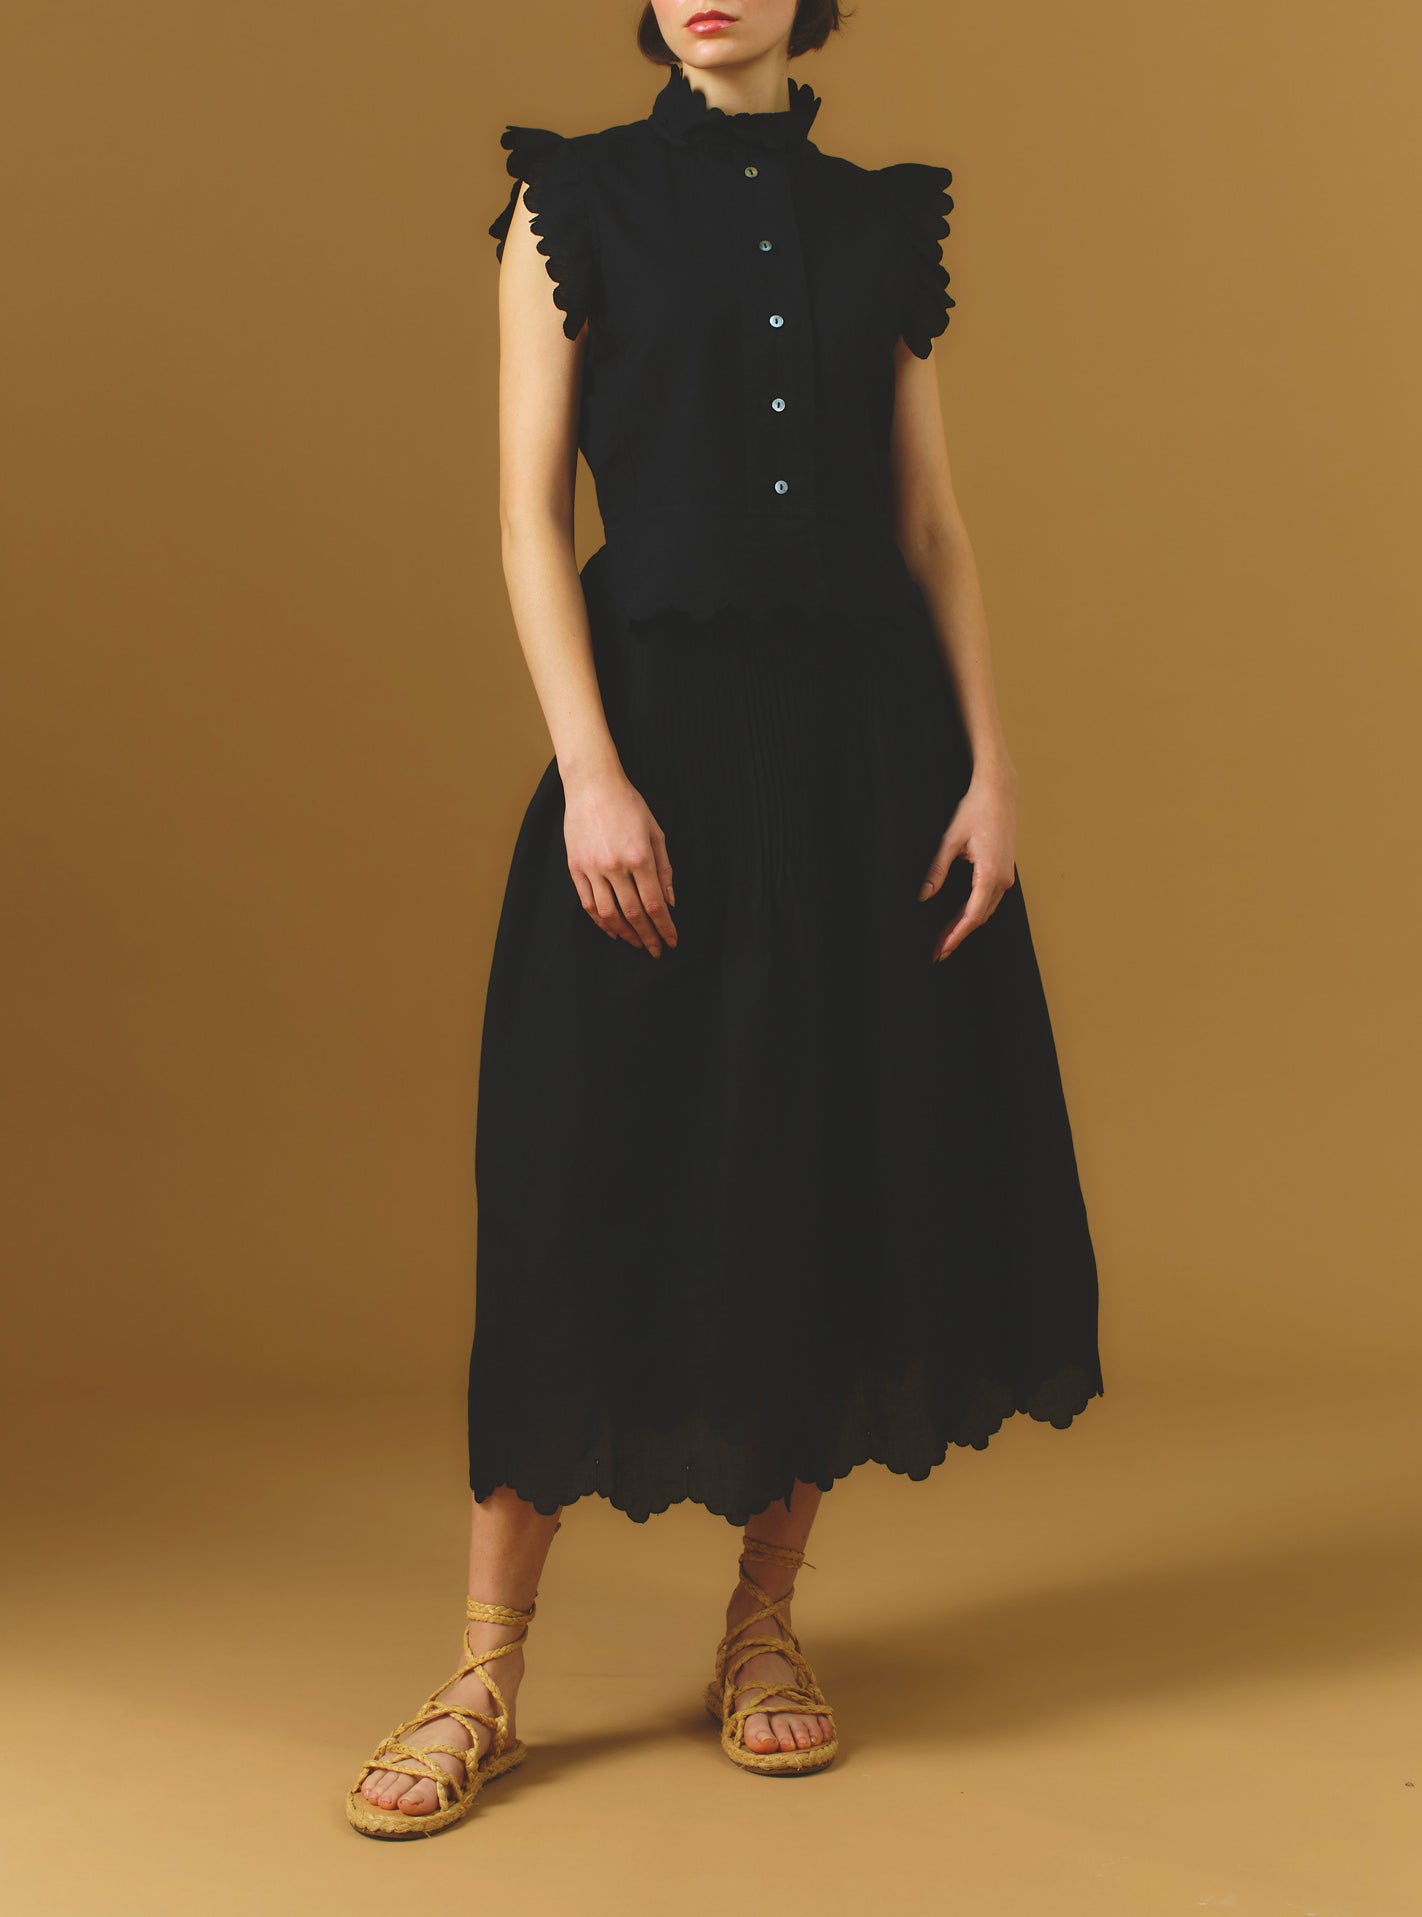 Large font view of Verde Barocco Scallops Black Skirt with Yael vest by Thierry Colson